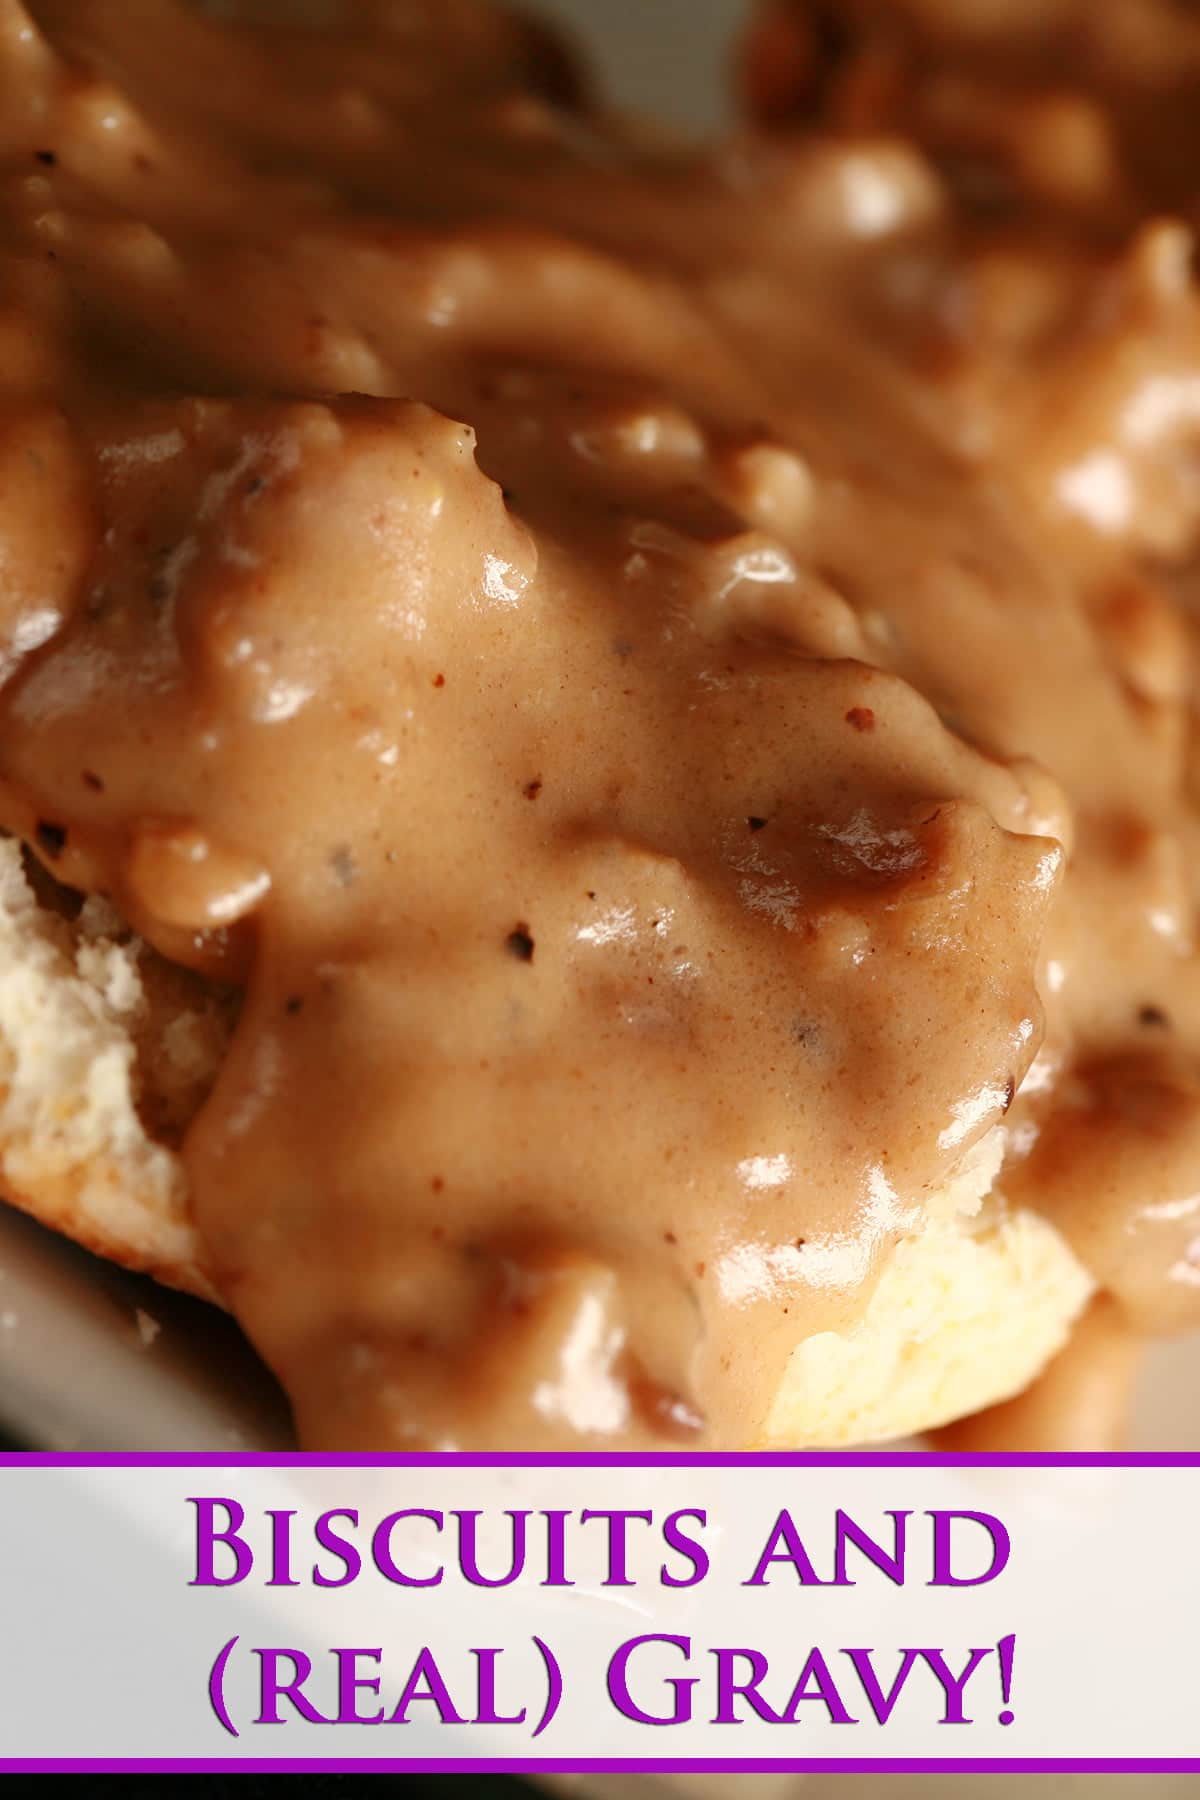 A close up view of a split biscuit covered with sausage gravy.